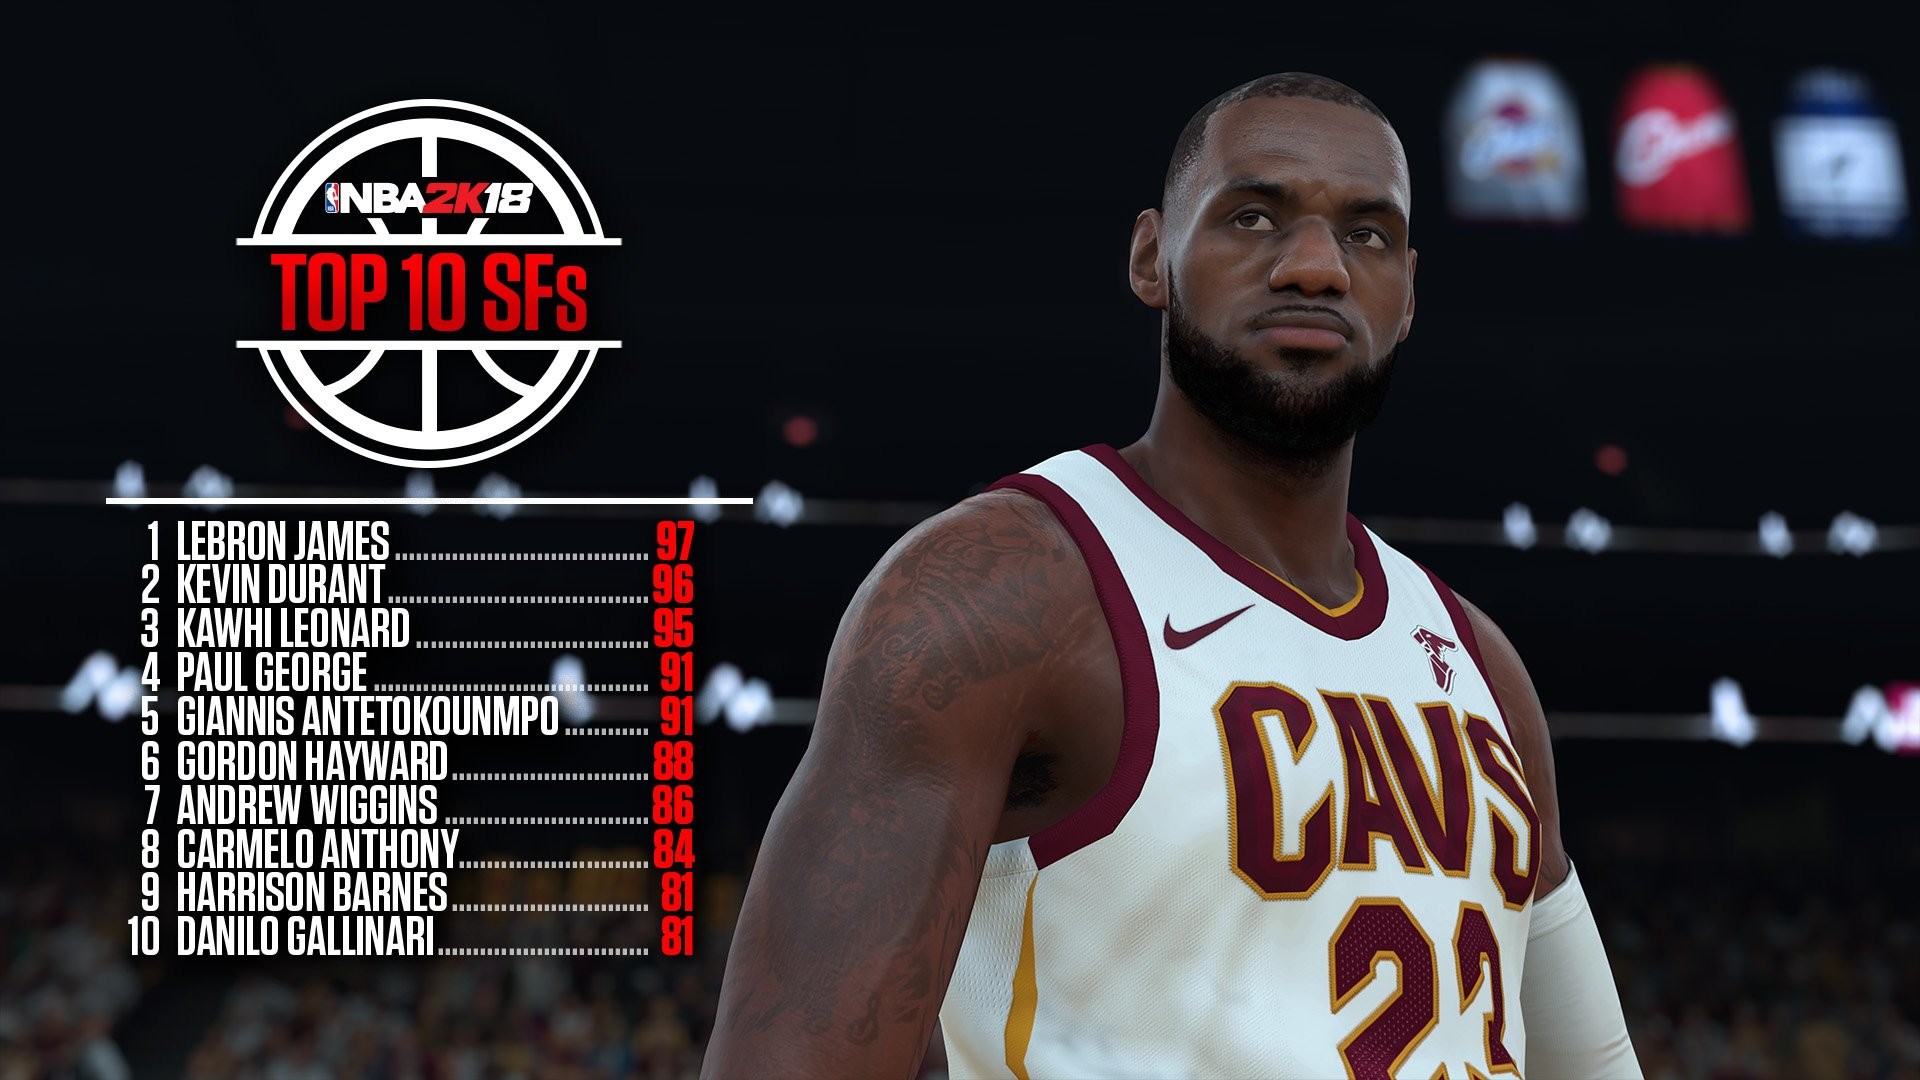 NBA 2K 2K18 on Twitter .KingJames leads the list of the Top 10 highest rated SFs in #NBA2K18 8RpSxBZddX